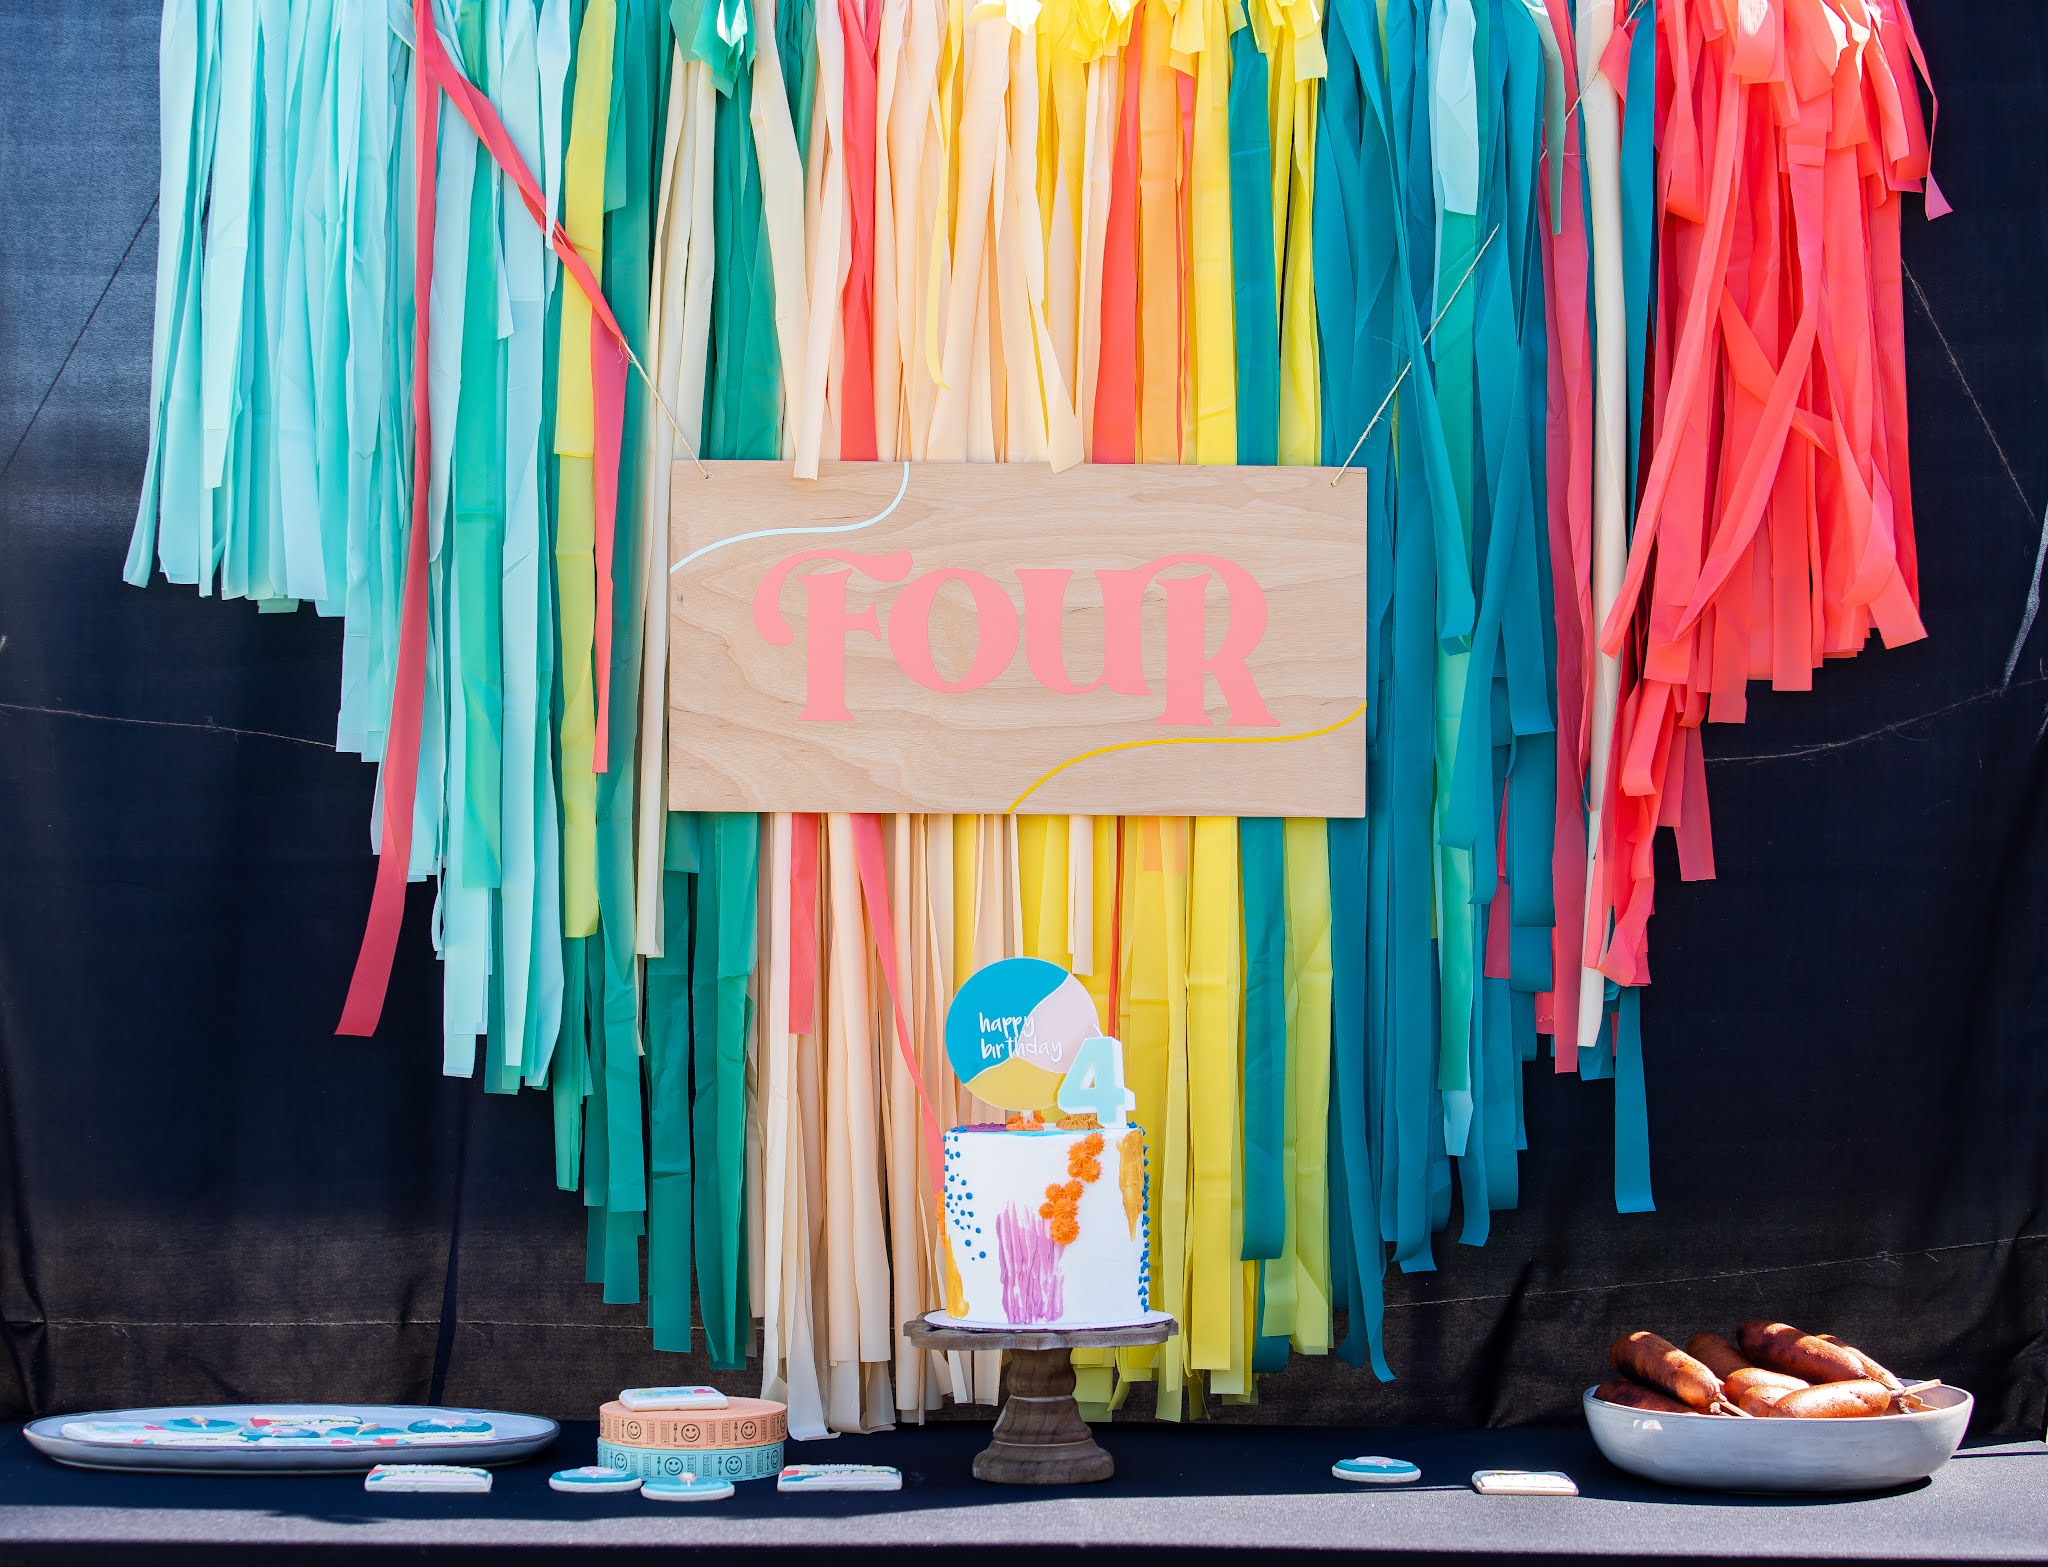 Super Chic Chanel Inspired Birthday Party - Birthday Party Ideas for Kids